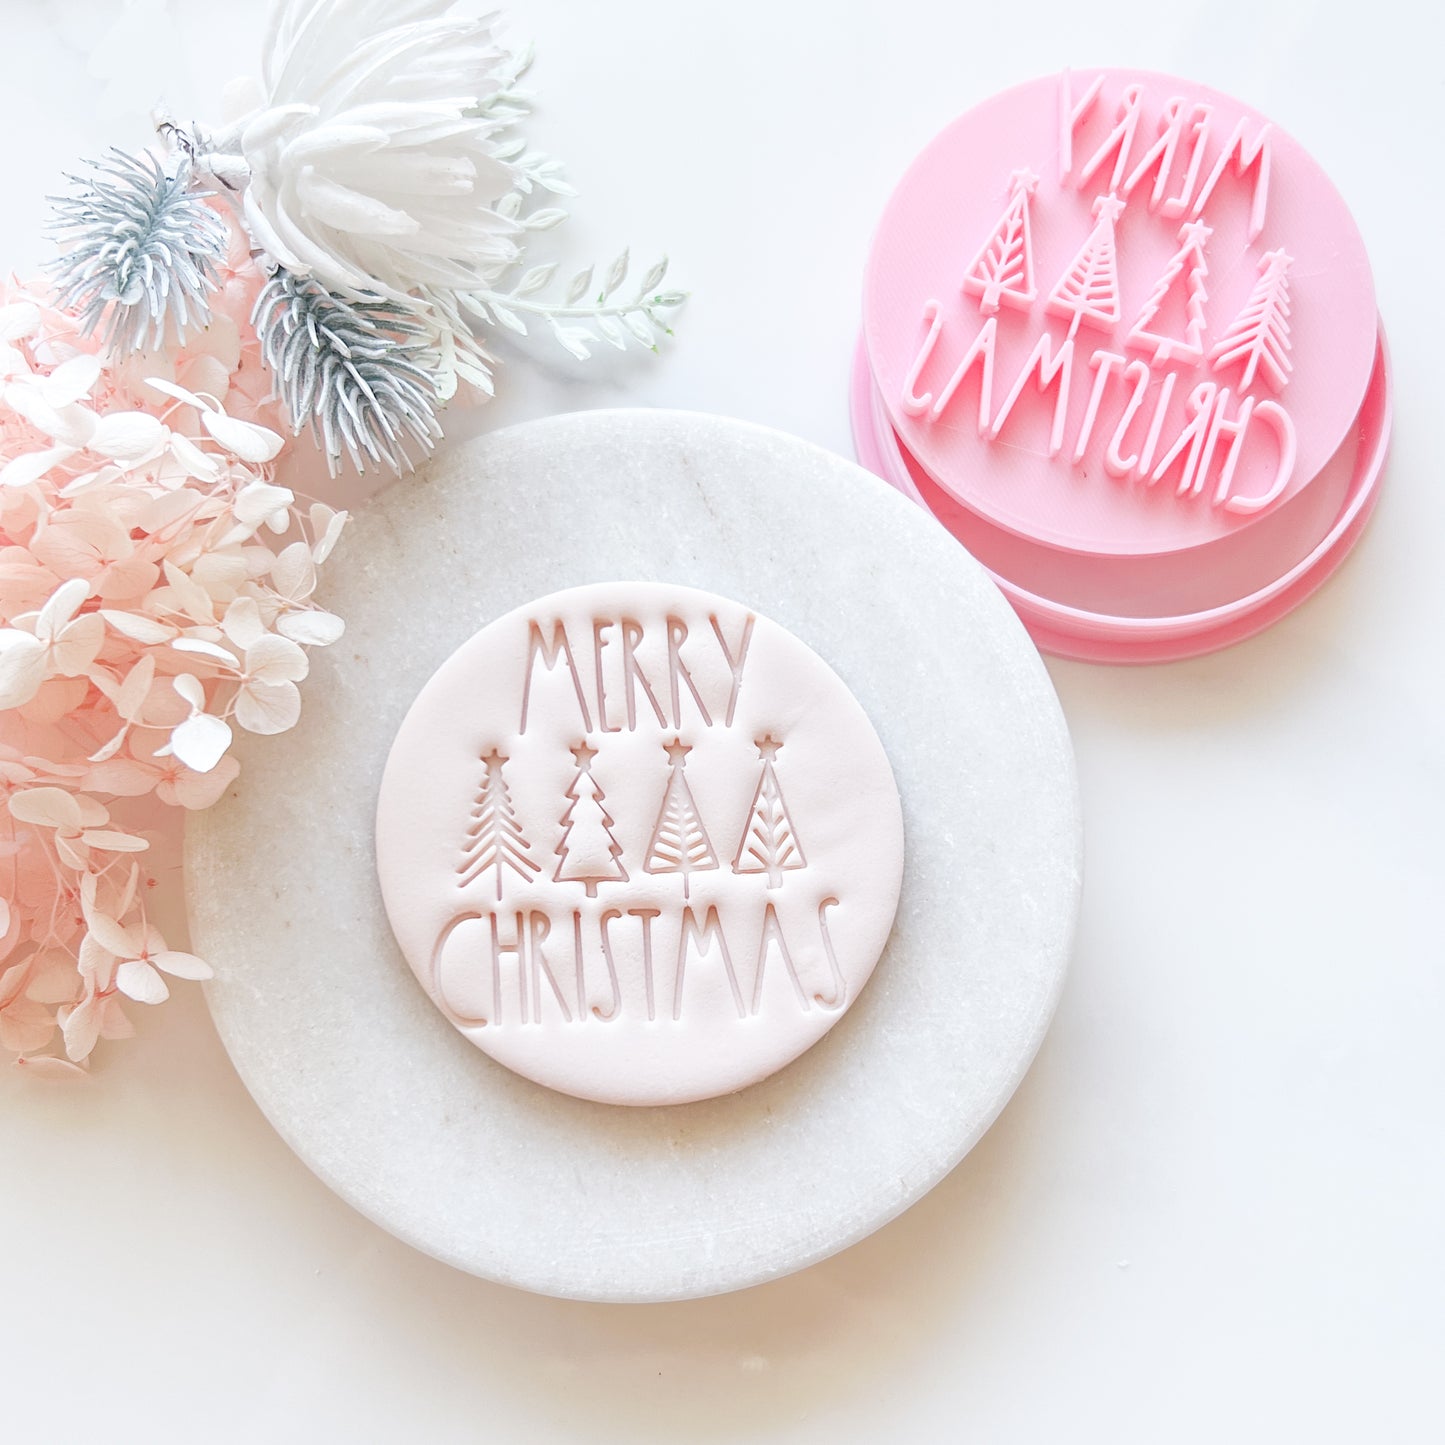 "Merry Christmas #1" Cookie Cutter & Stamp